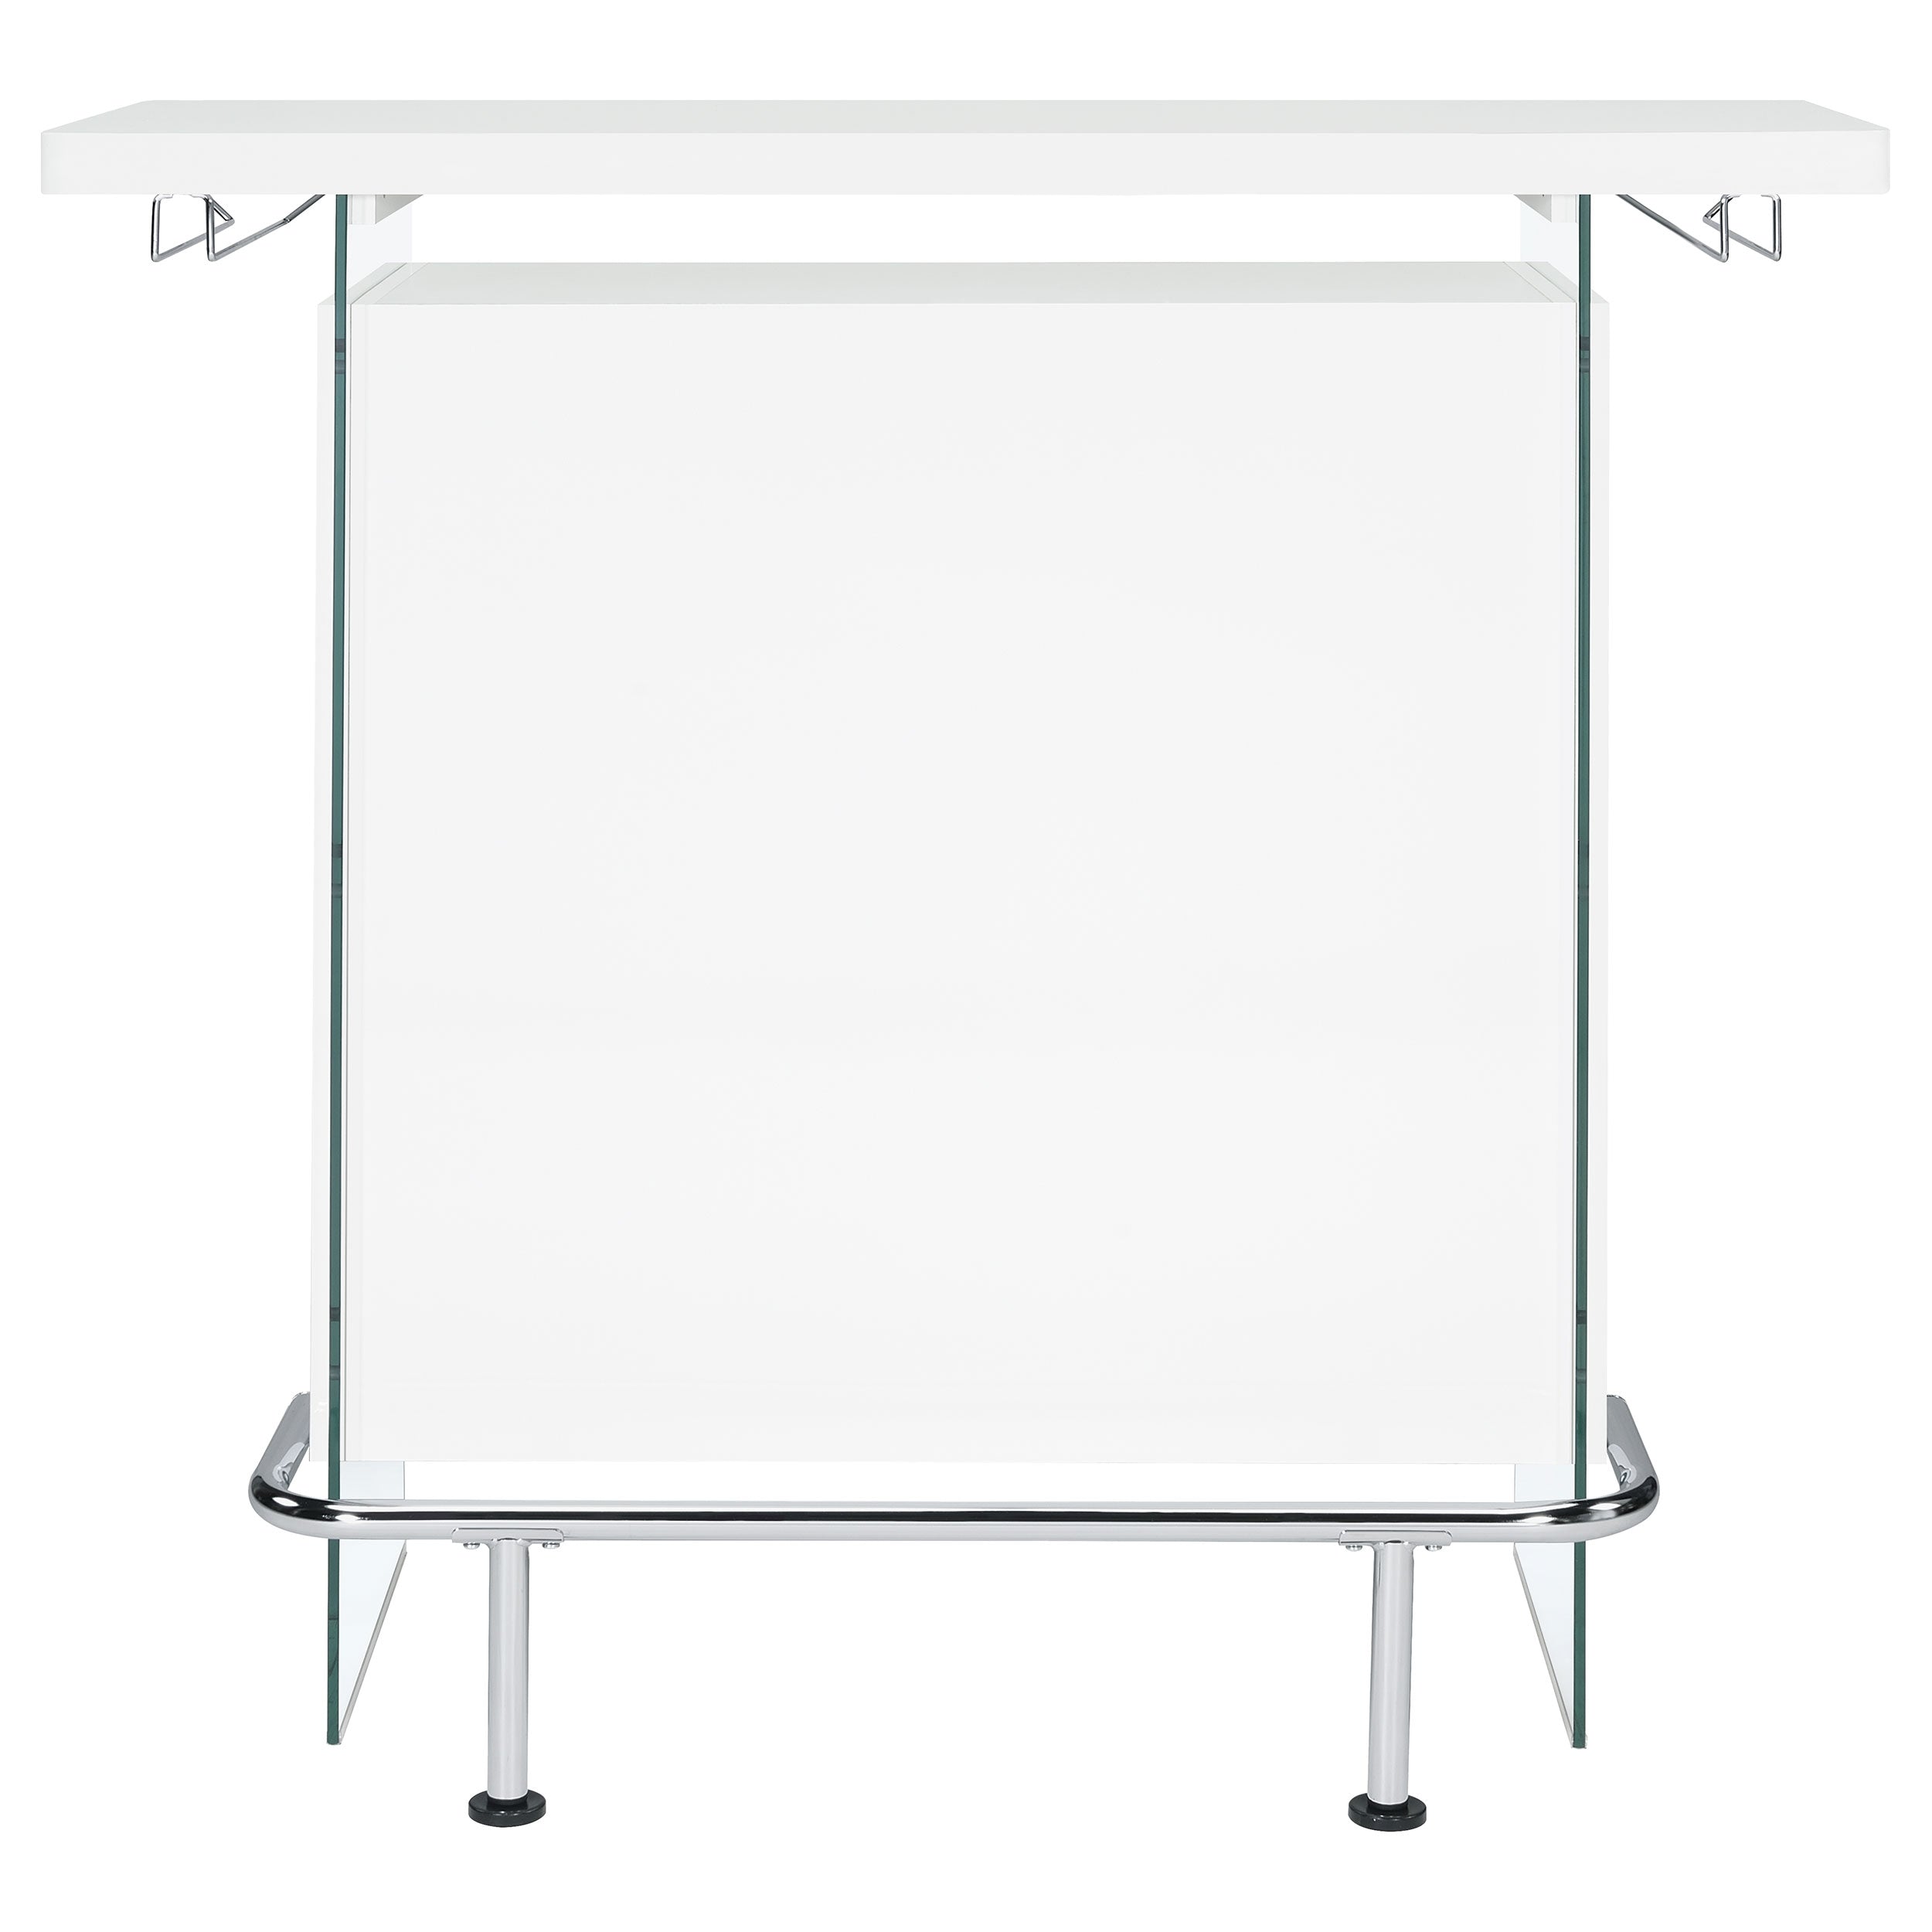 Acosta Rectangular Bar Unit with Footrest and Glass Side Panels Home Bar White